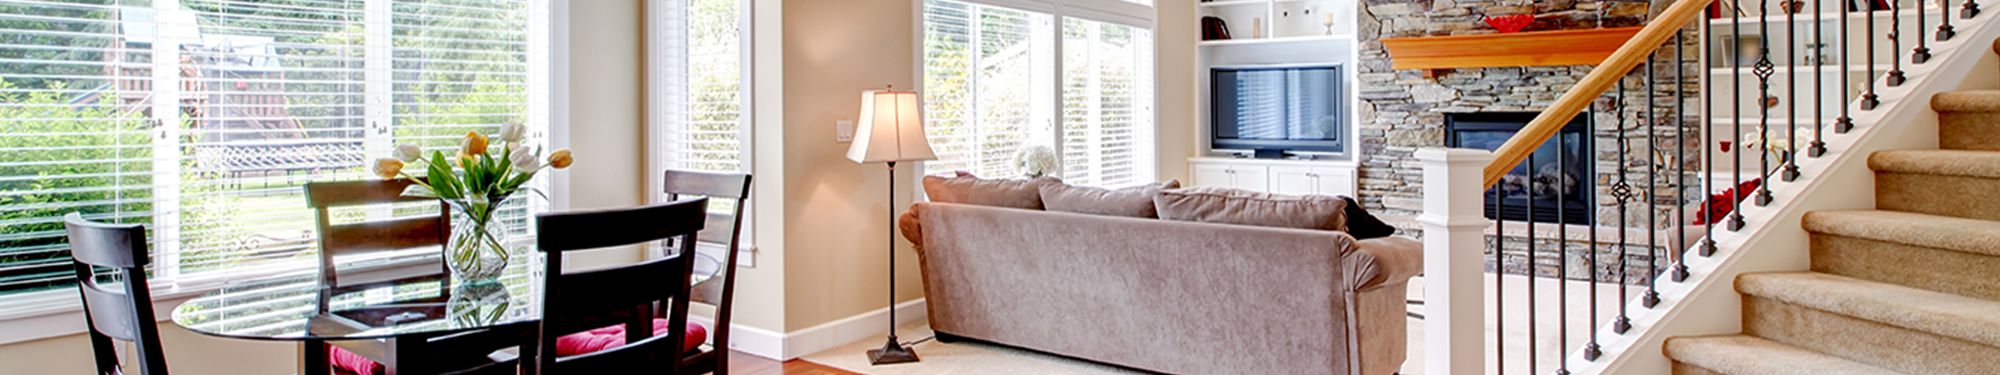 open window shades in a living area